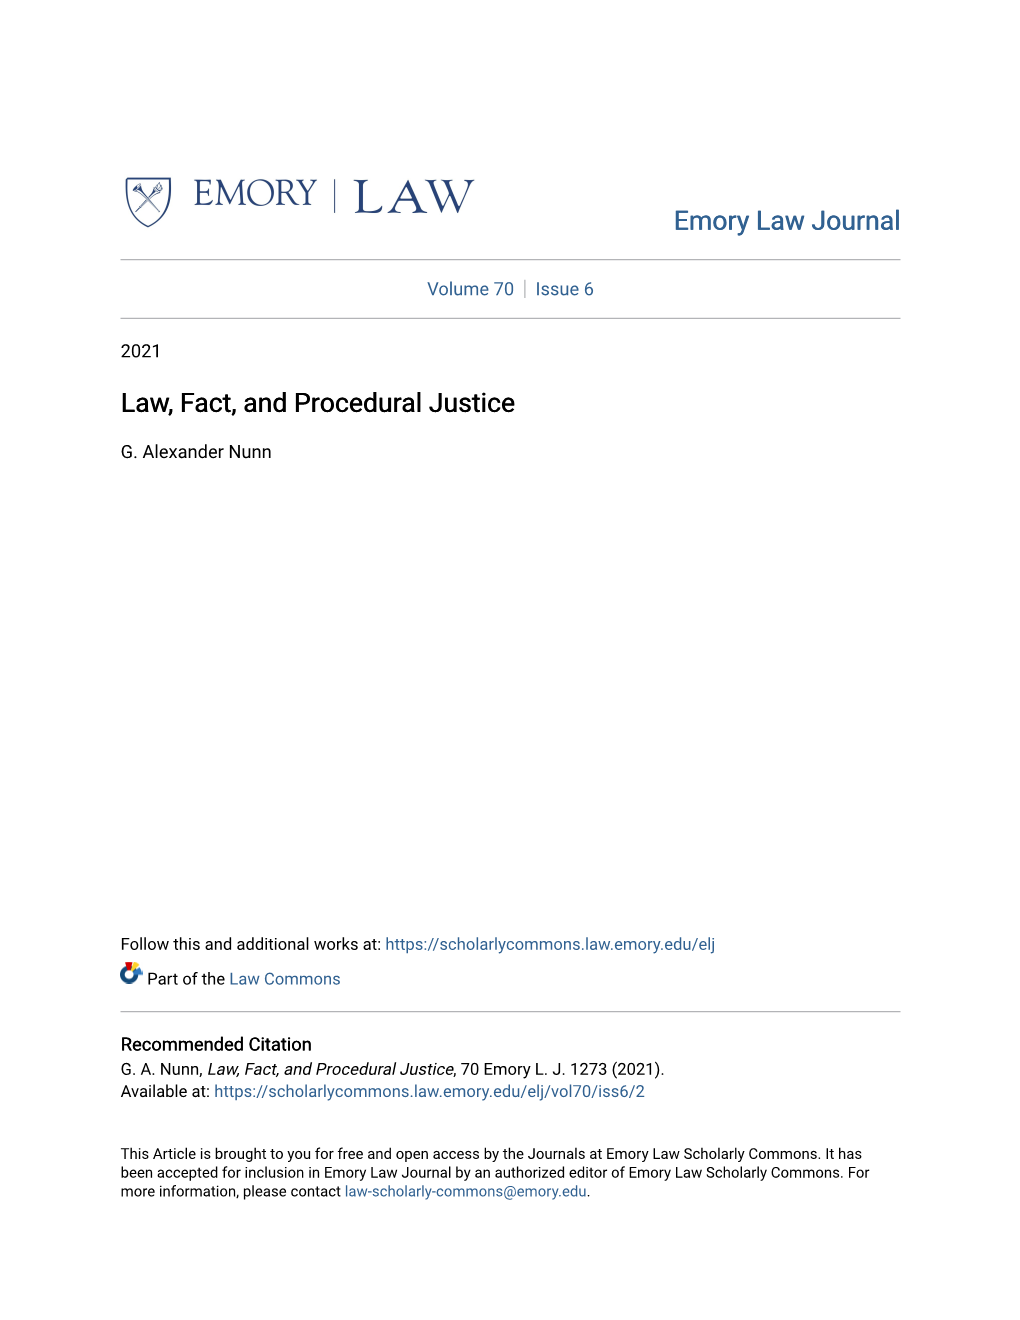 Law, Fact, and Procedural Justice